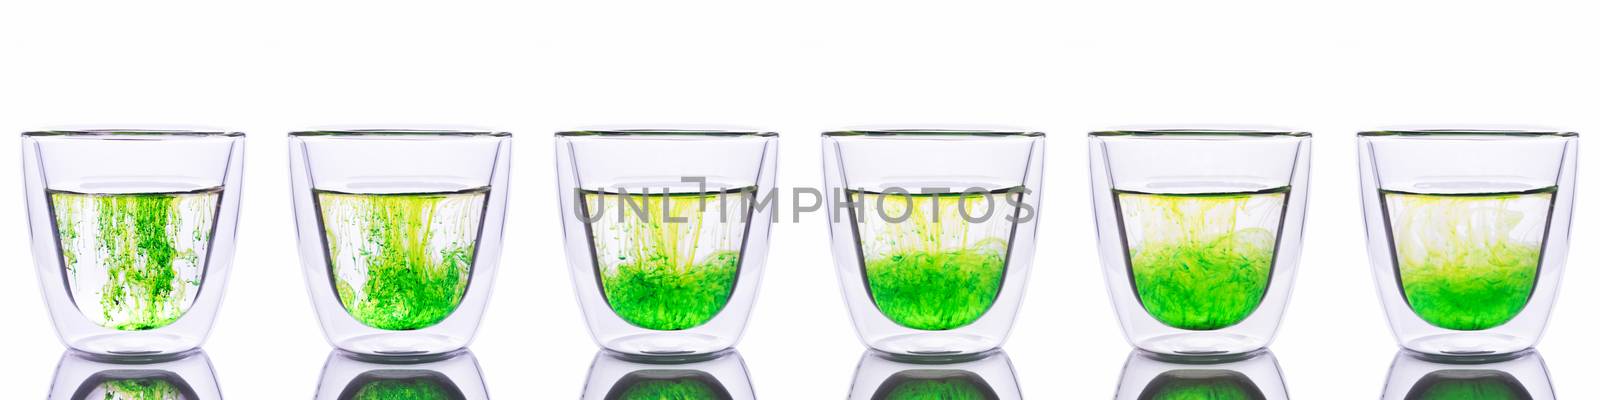 Green color spread in glass of water  by zneb076